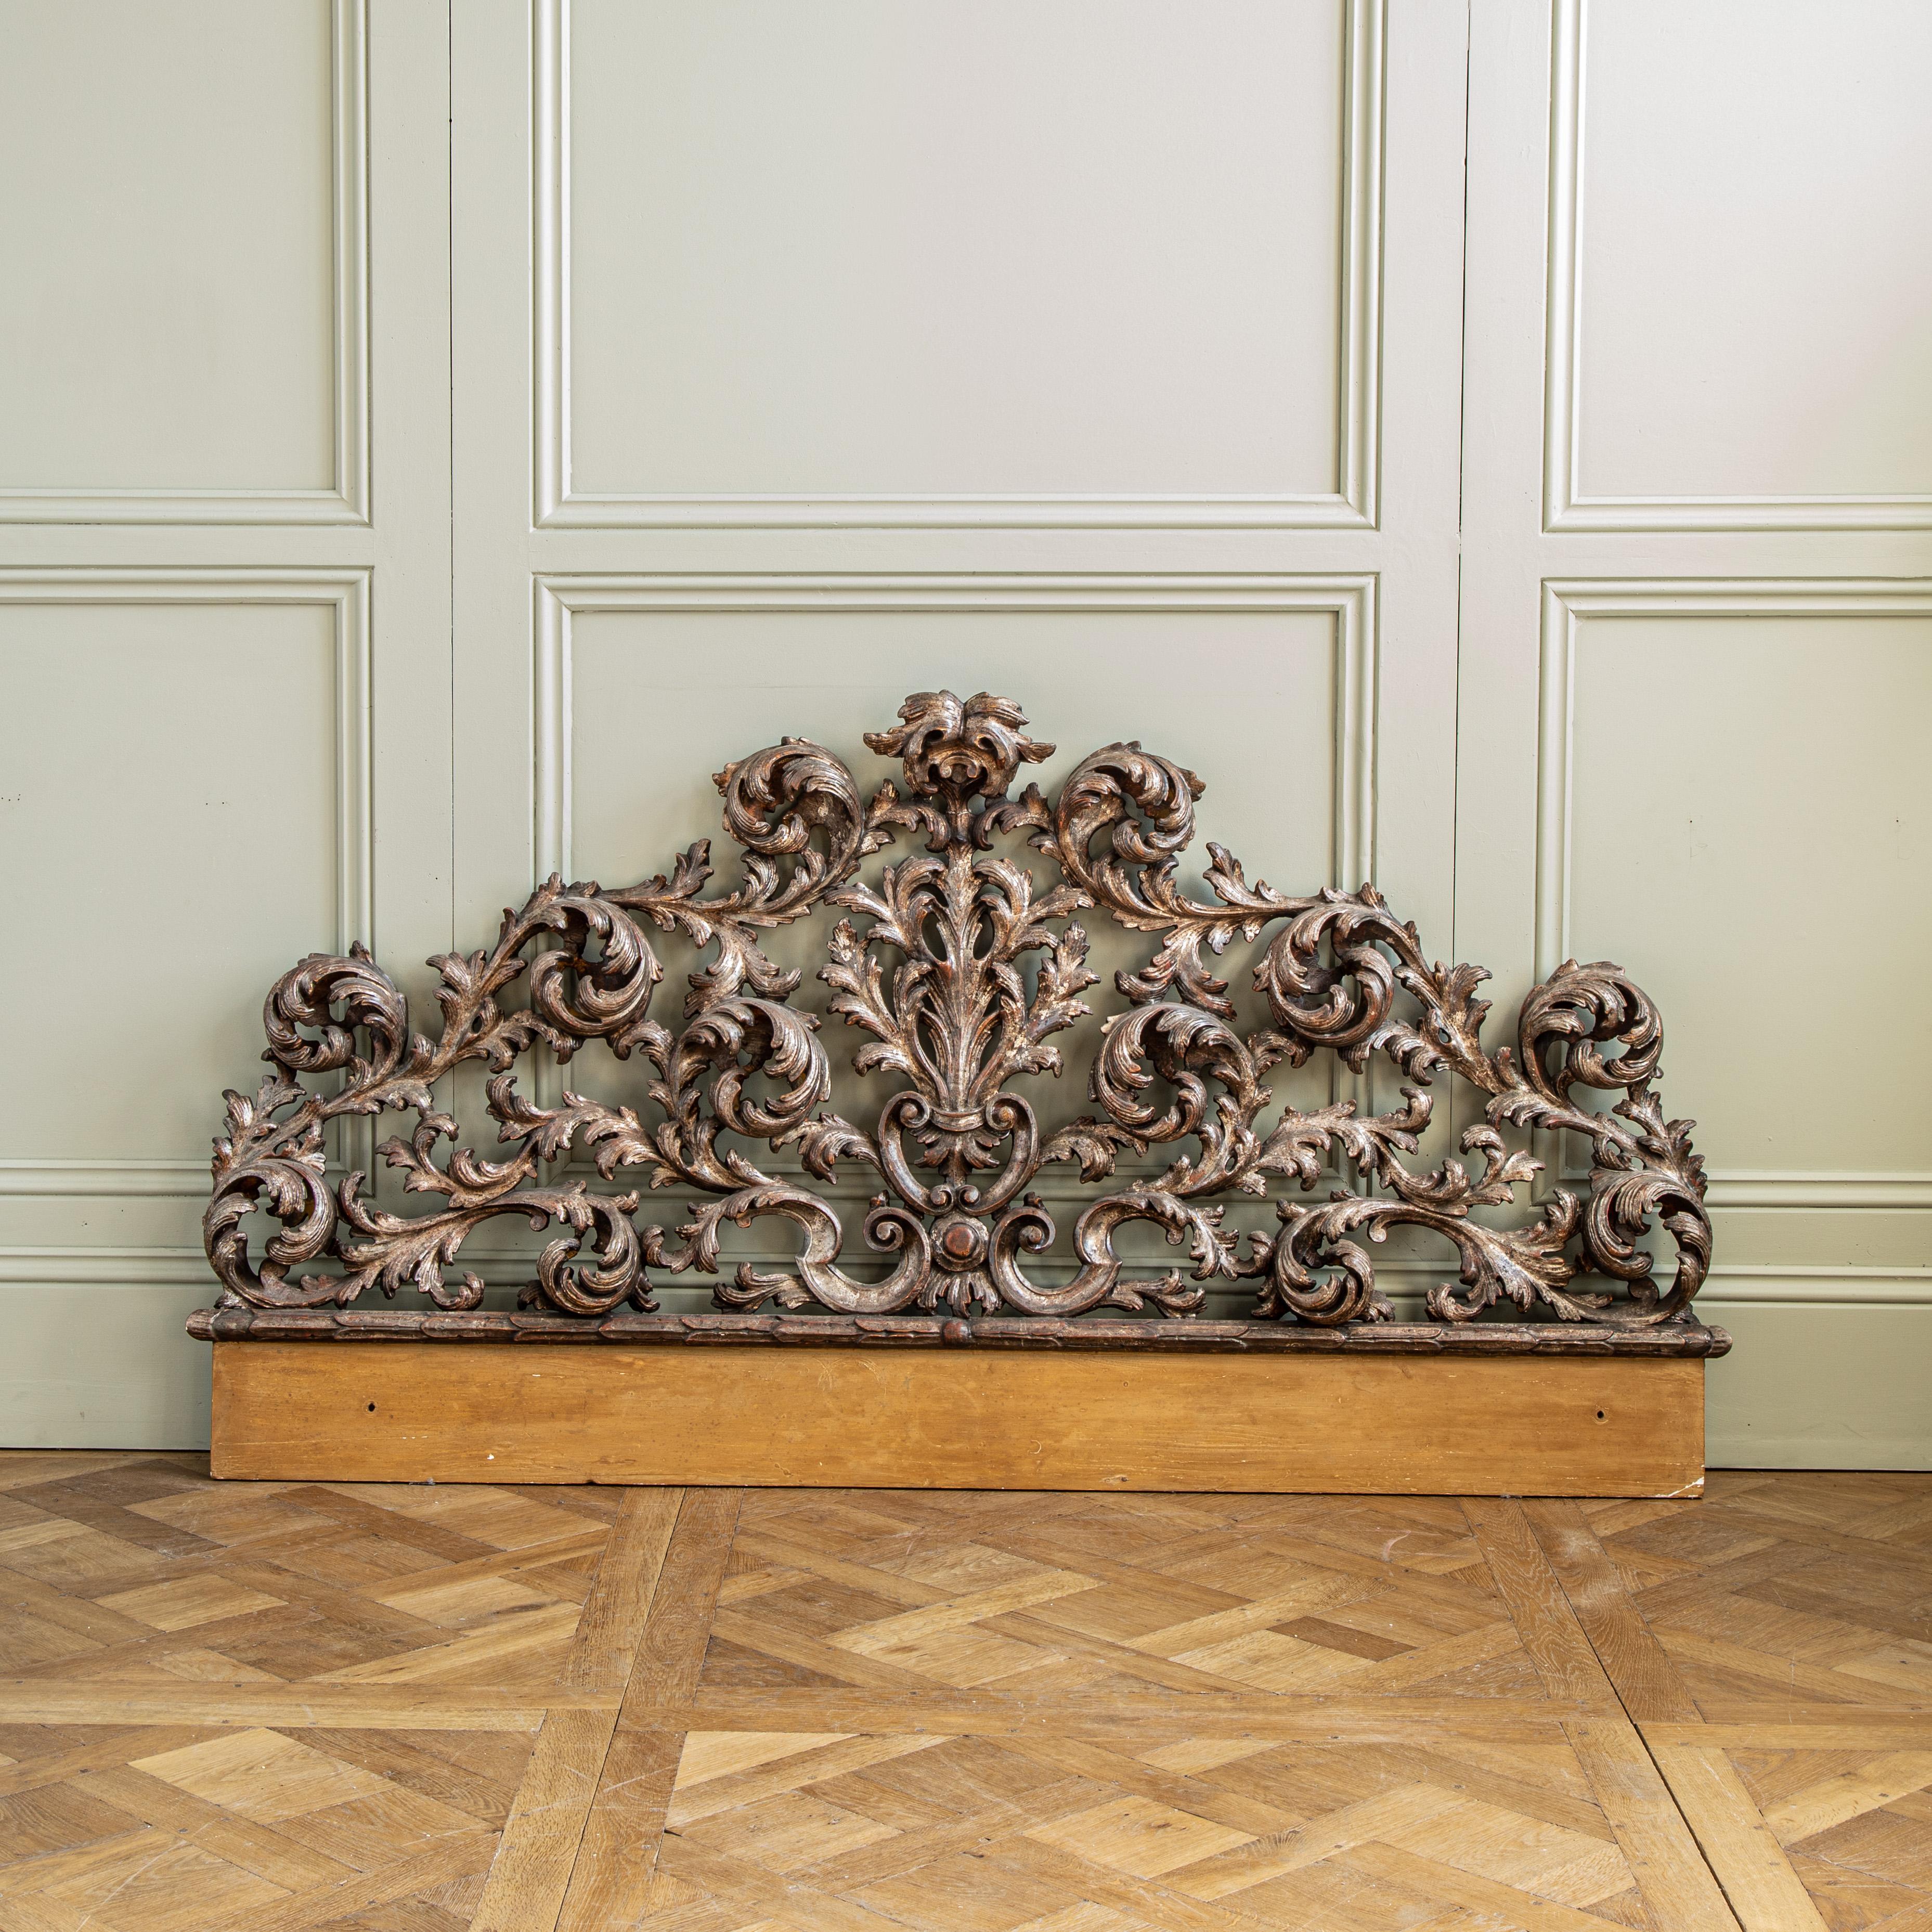 This elegant Antique Rococo Headboard is the perfect centrepiece for a classic bedroom. Crafted in Italy during the 1900s, this headboard boasts a timeless Rococo style.
We can make bespoke upholstered panel to integrate the carved piece and finish